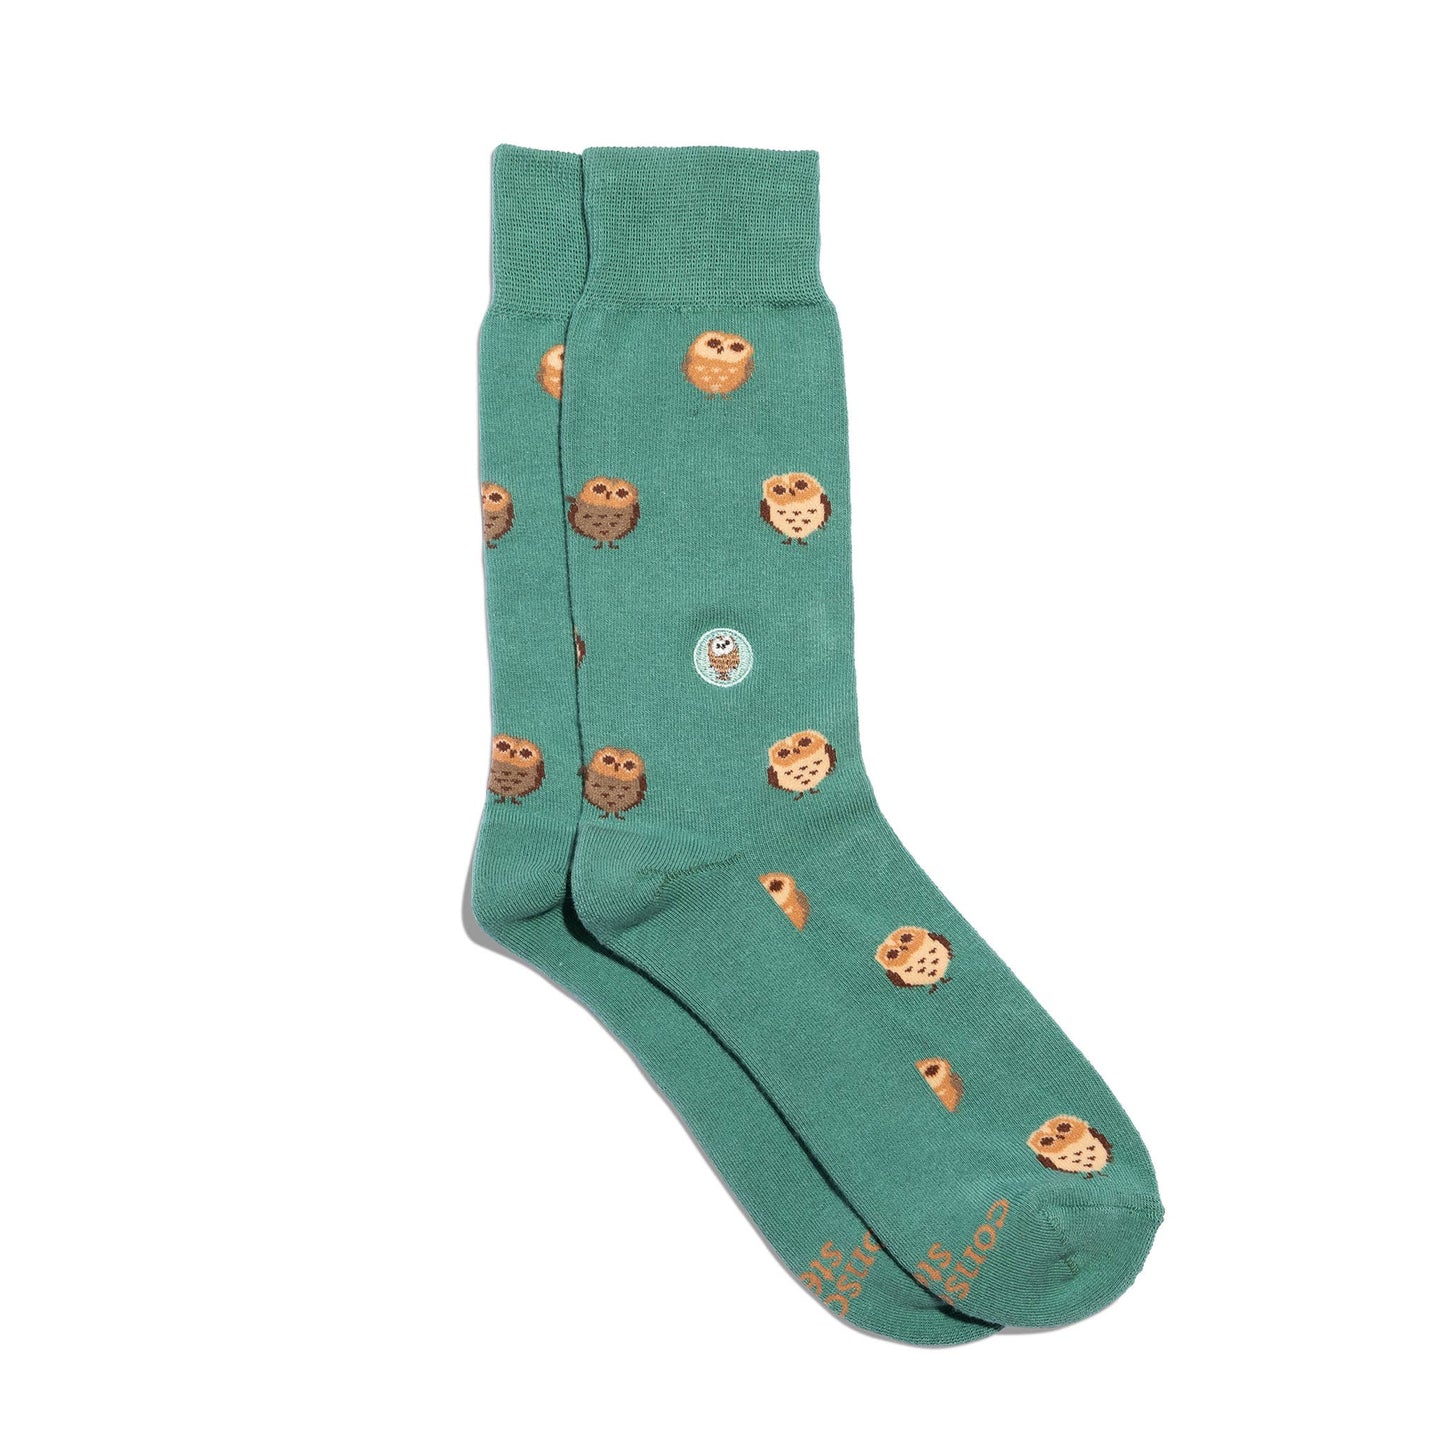 Socks that Protect Owls: Small